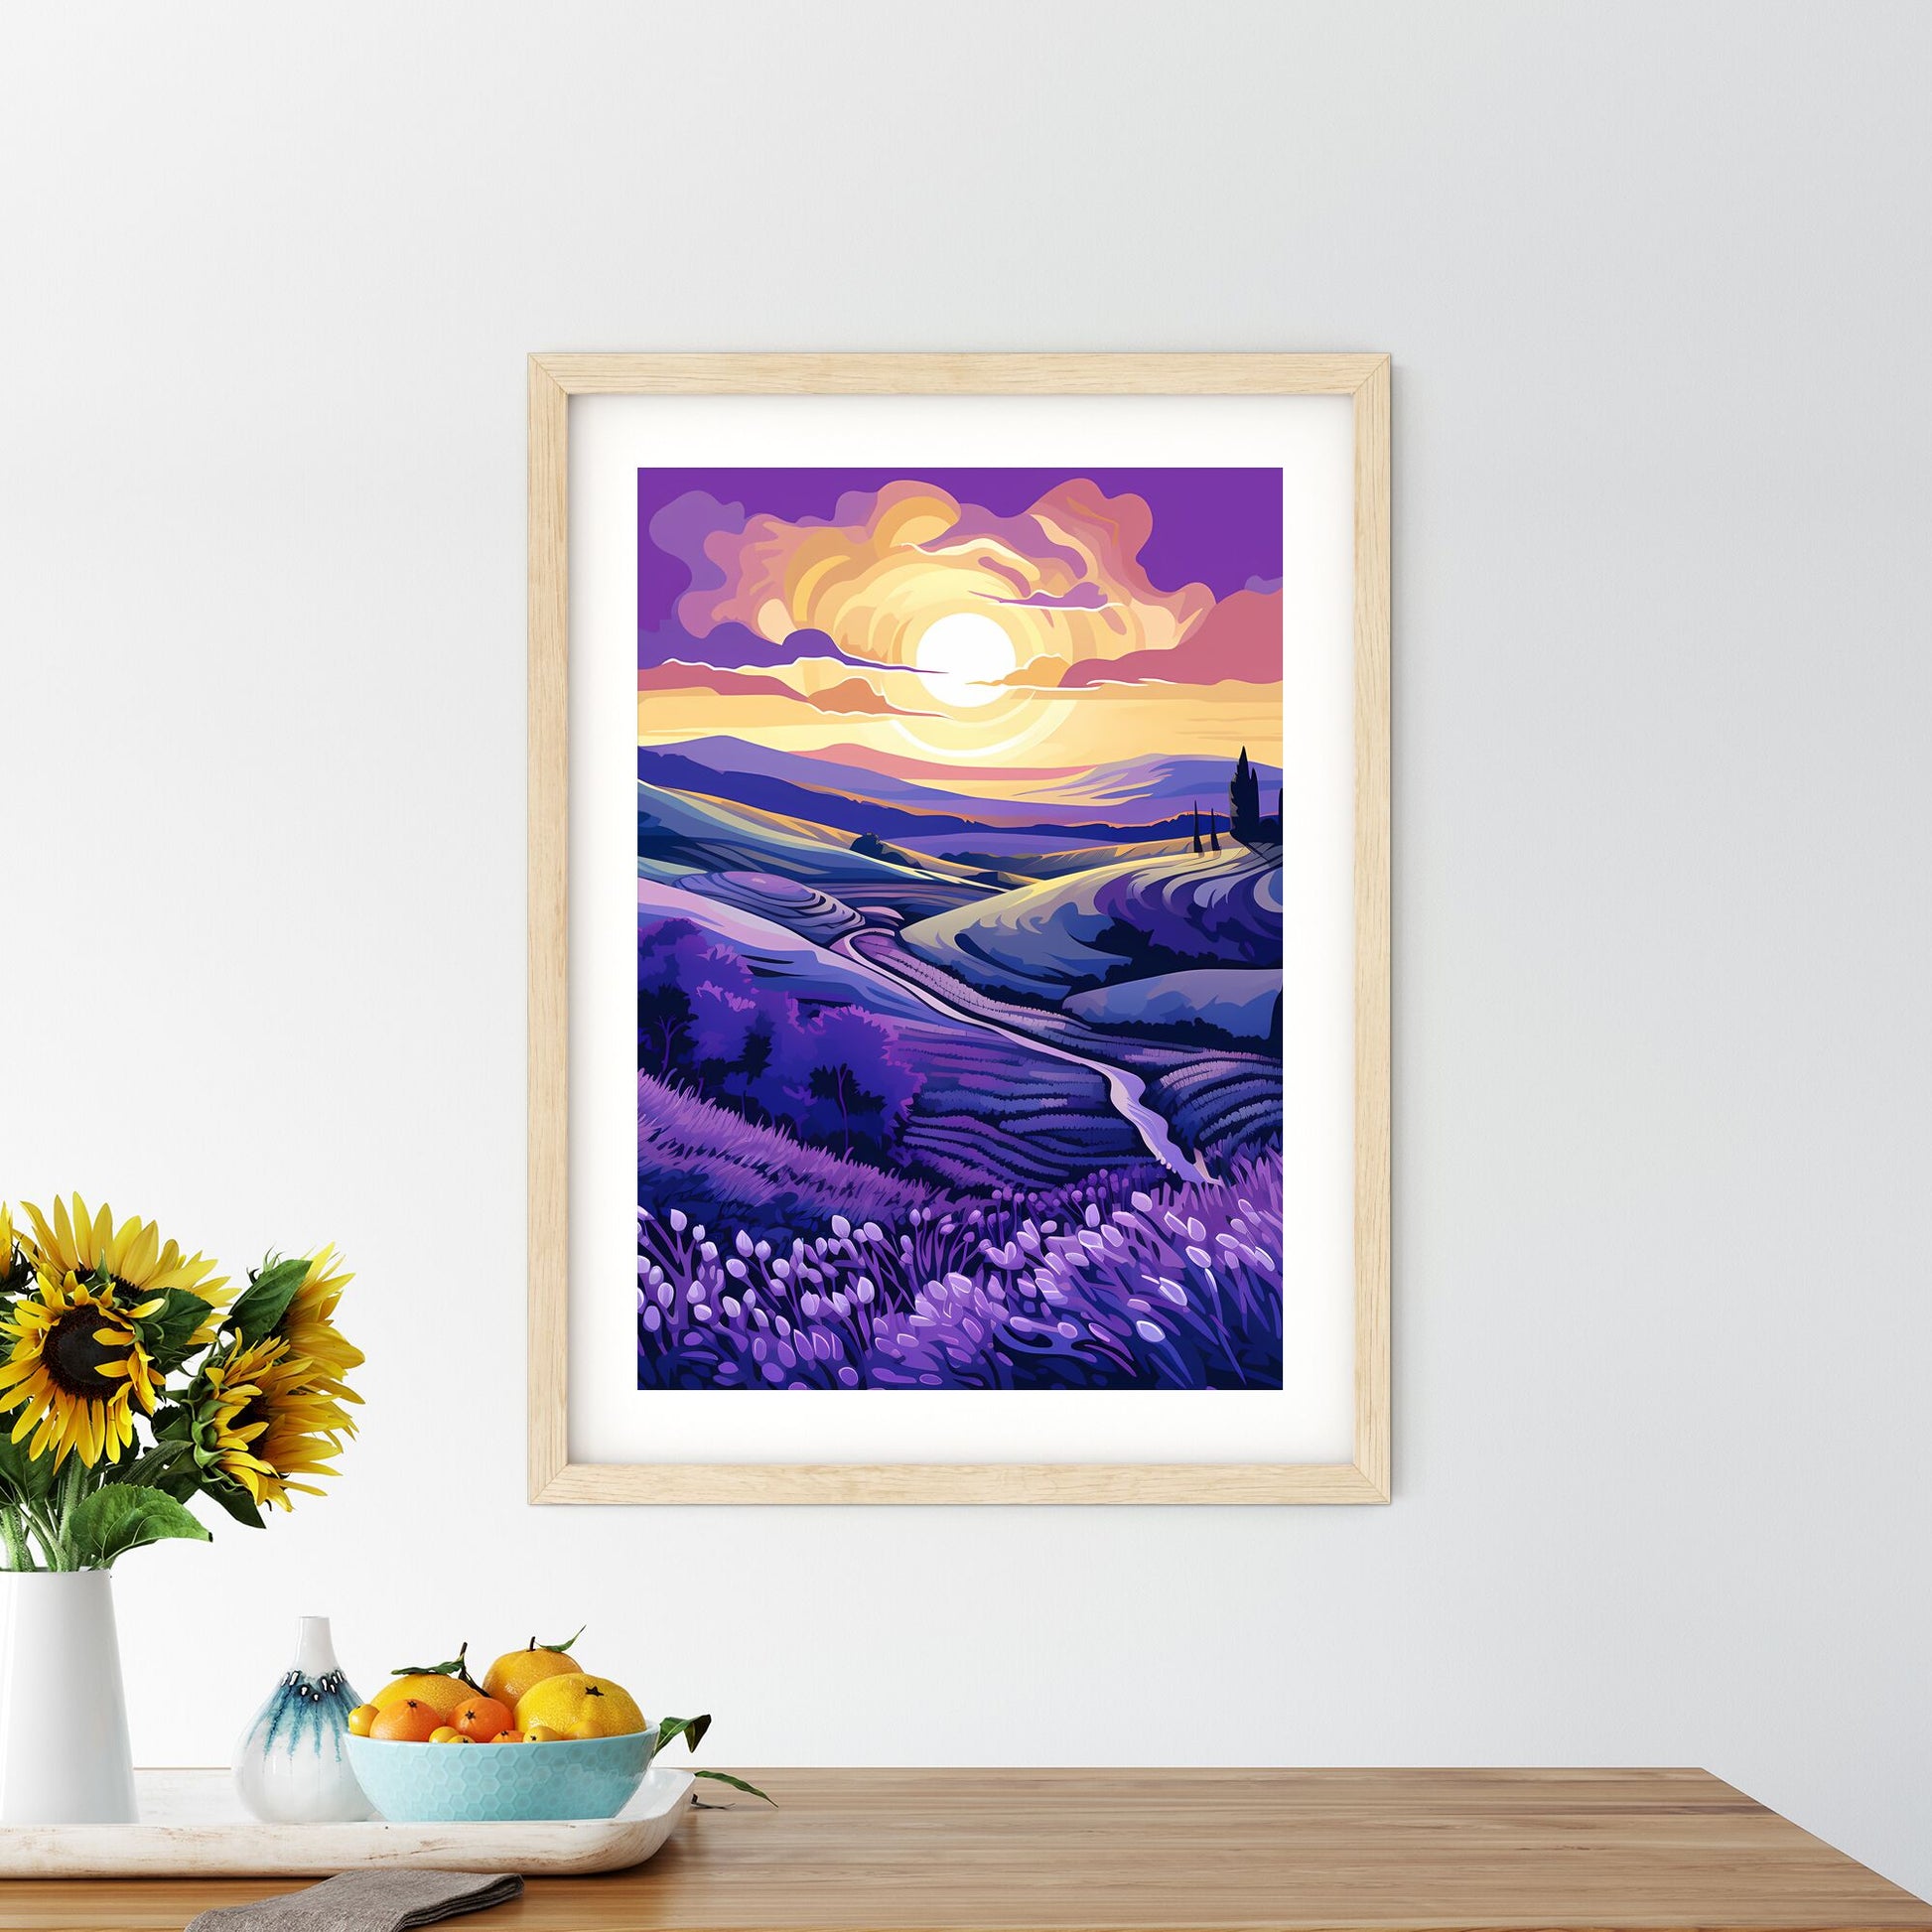 A Painting Of A Landscape With A Road And Lavender Fields Art Print Default Title